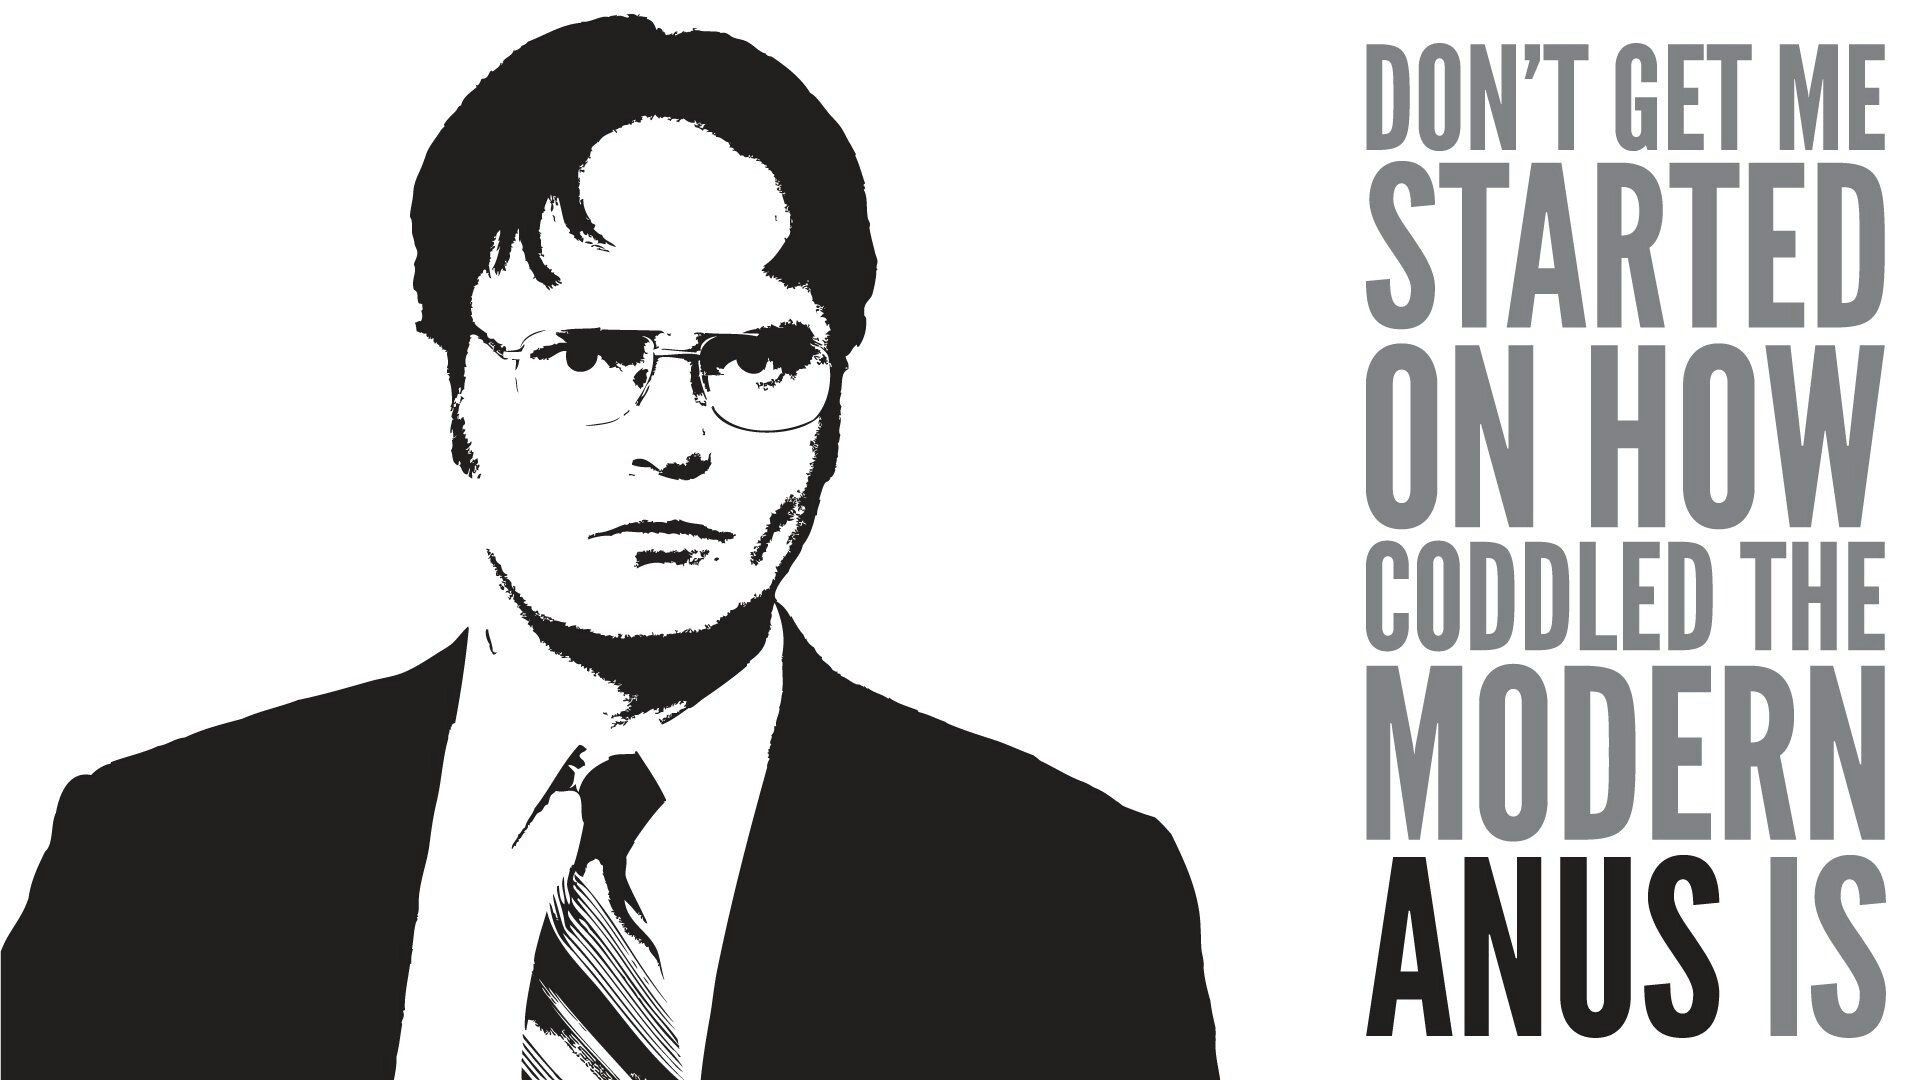 Dwight Schrute. The office characters, Office wallpaper, Office quotes